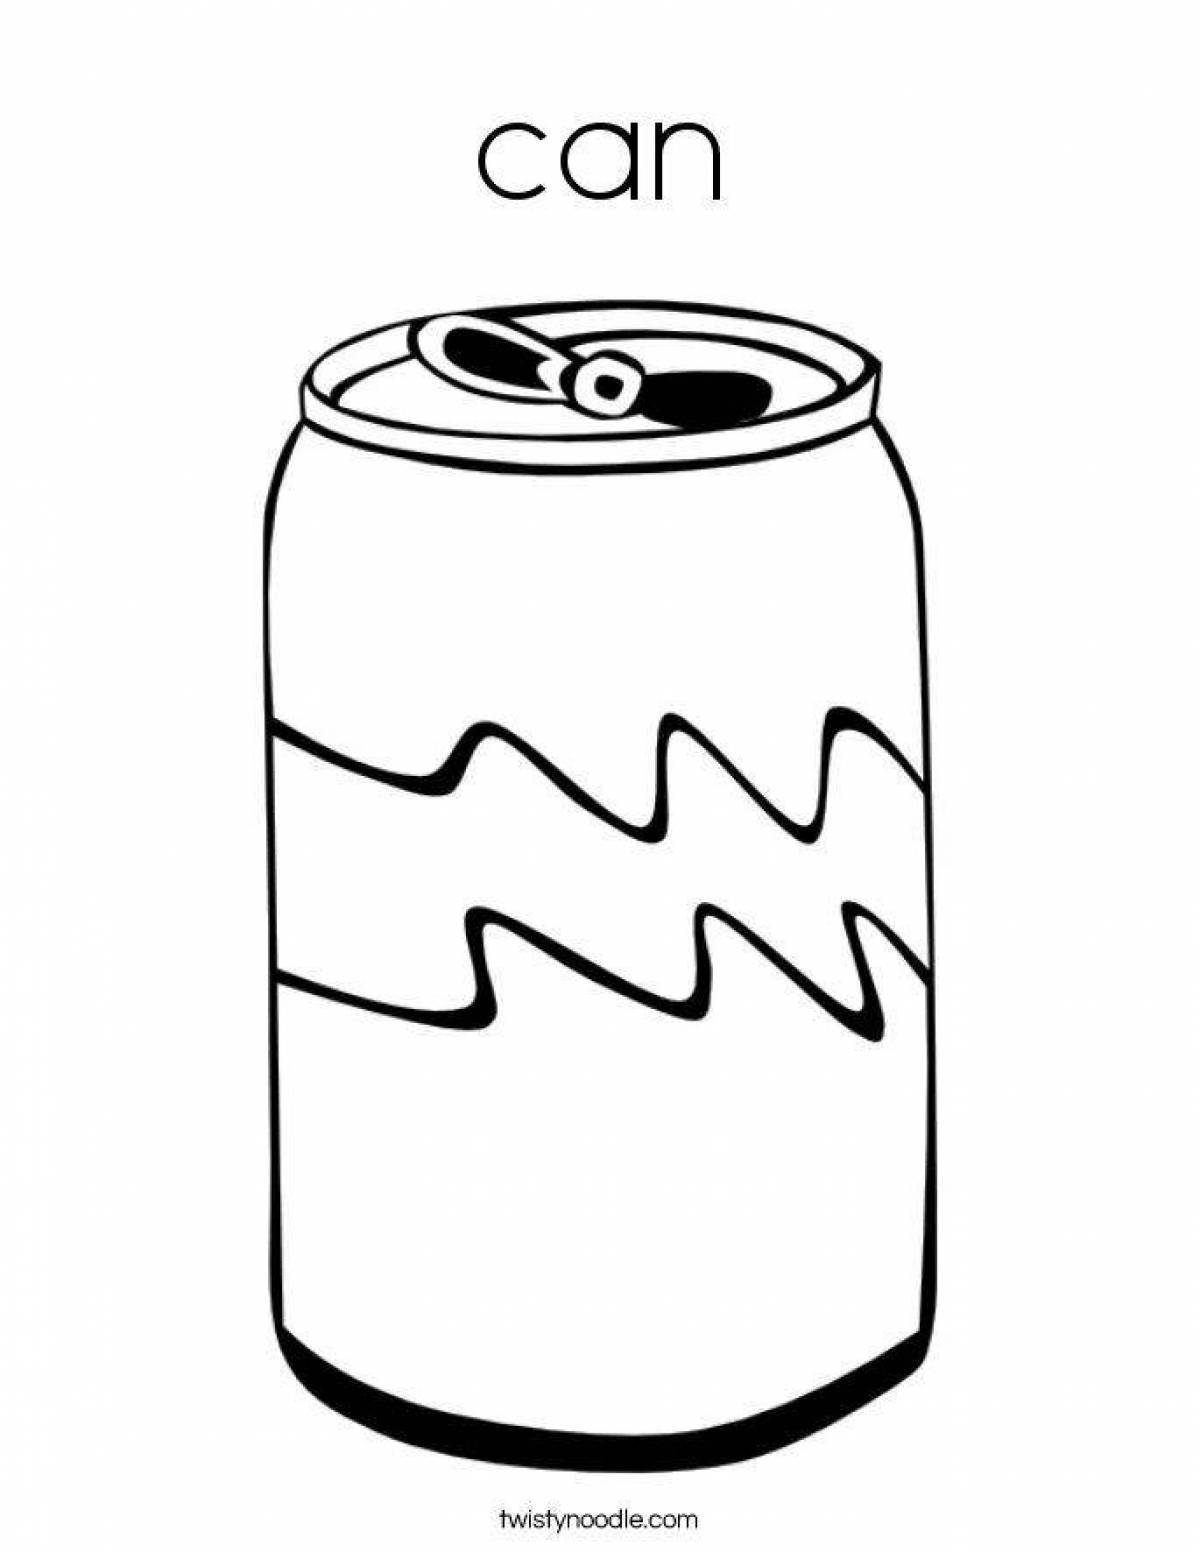 Amazing pepsi coloring page